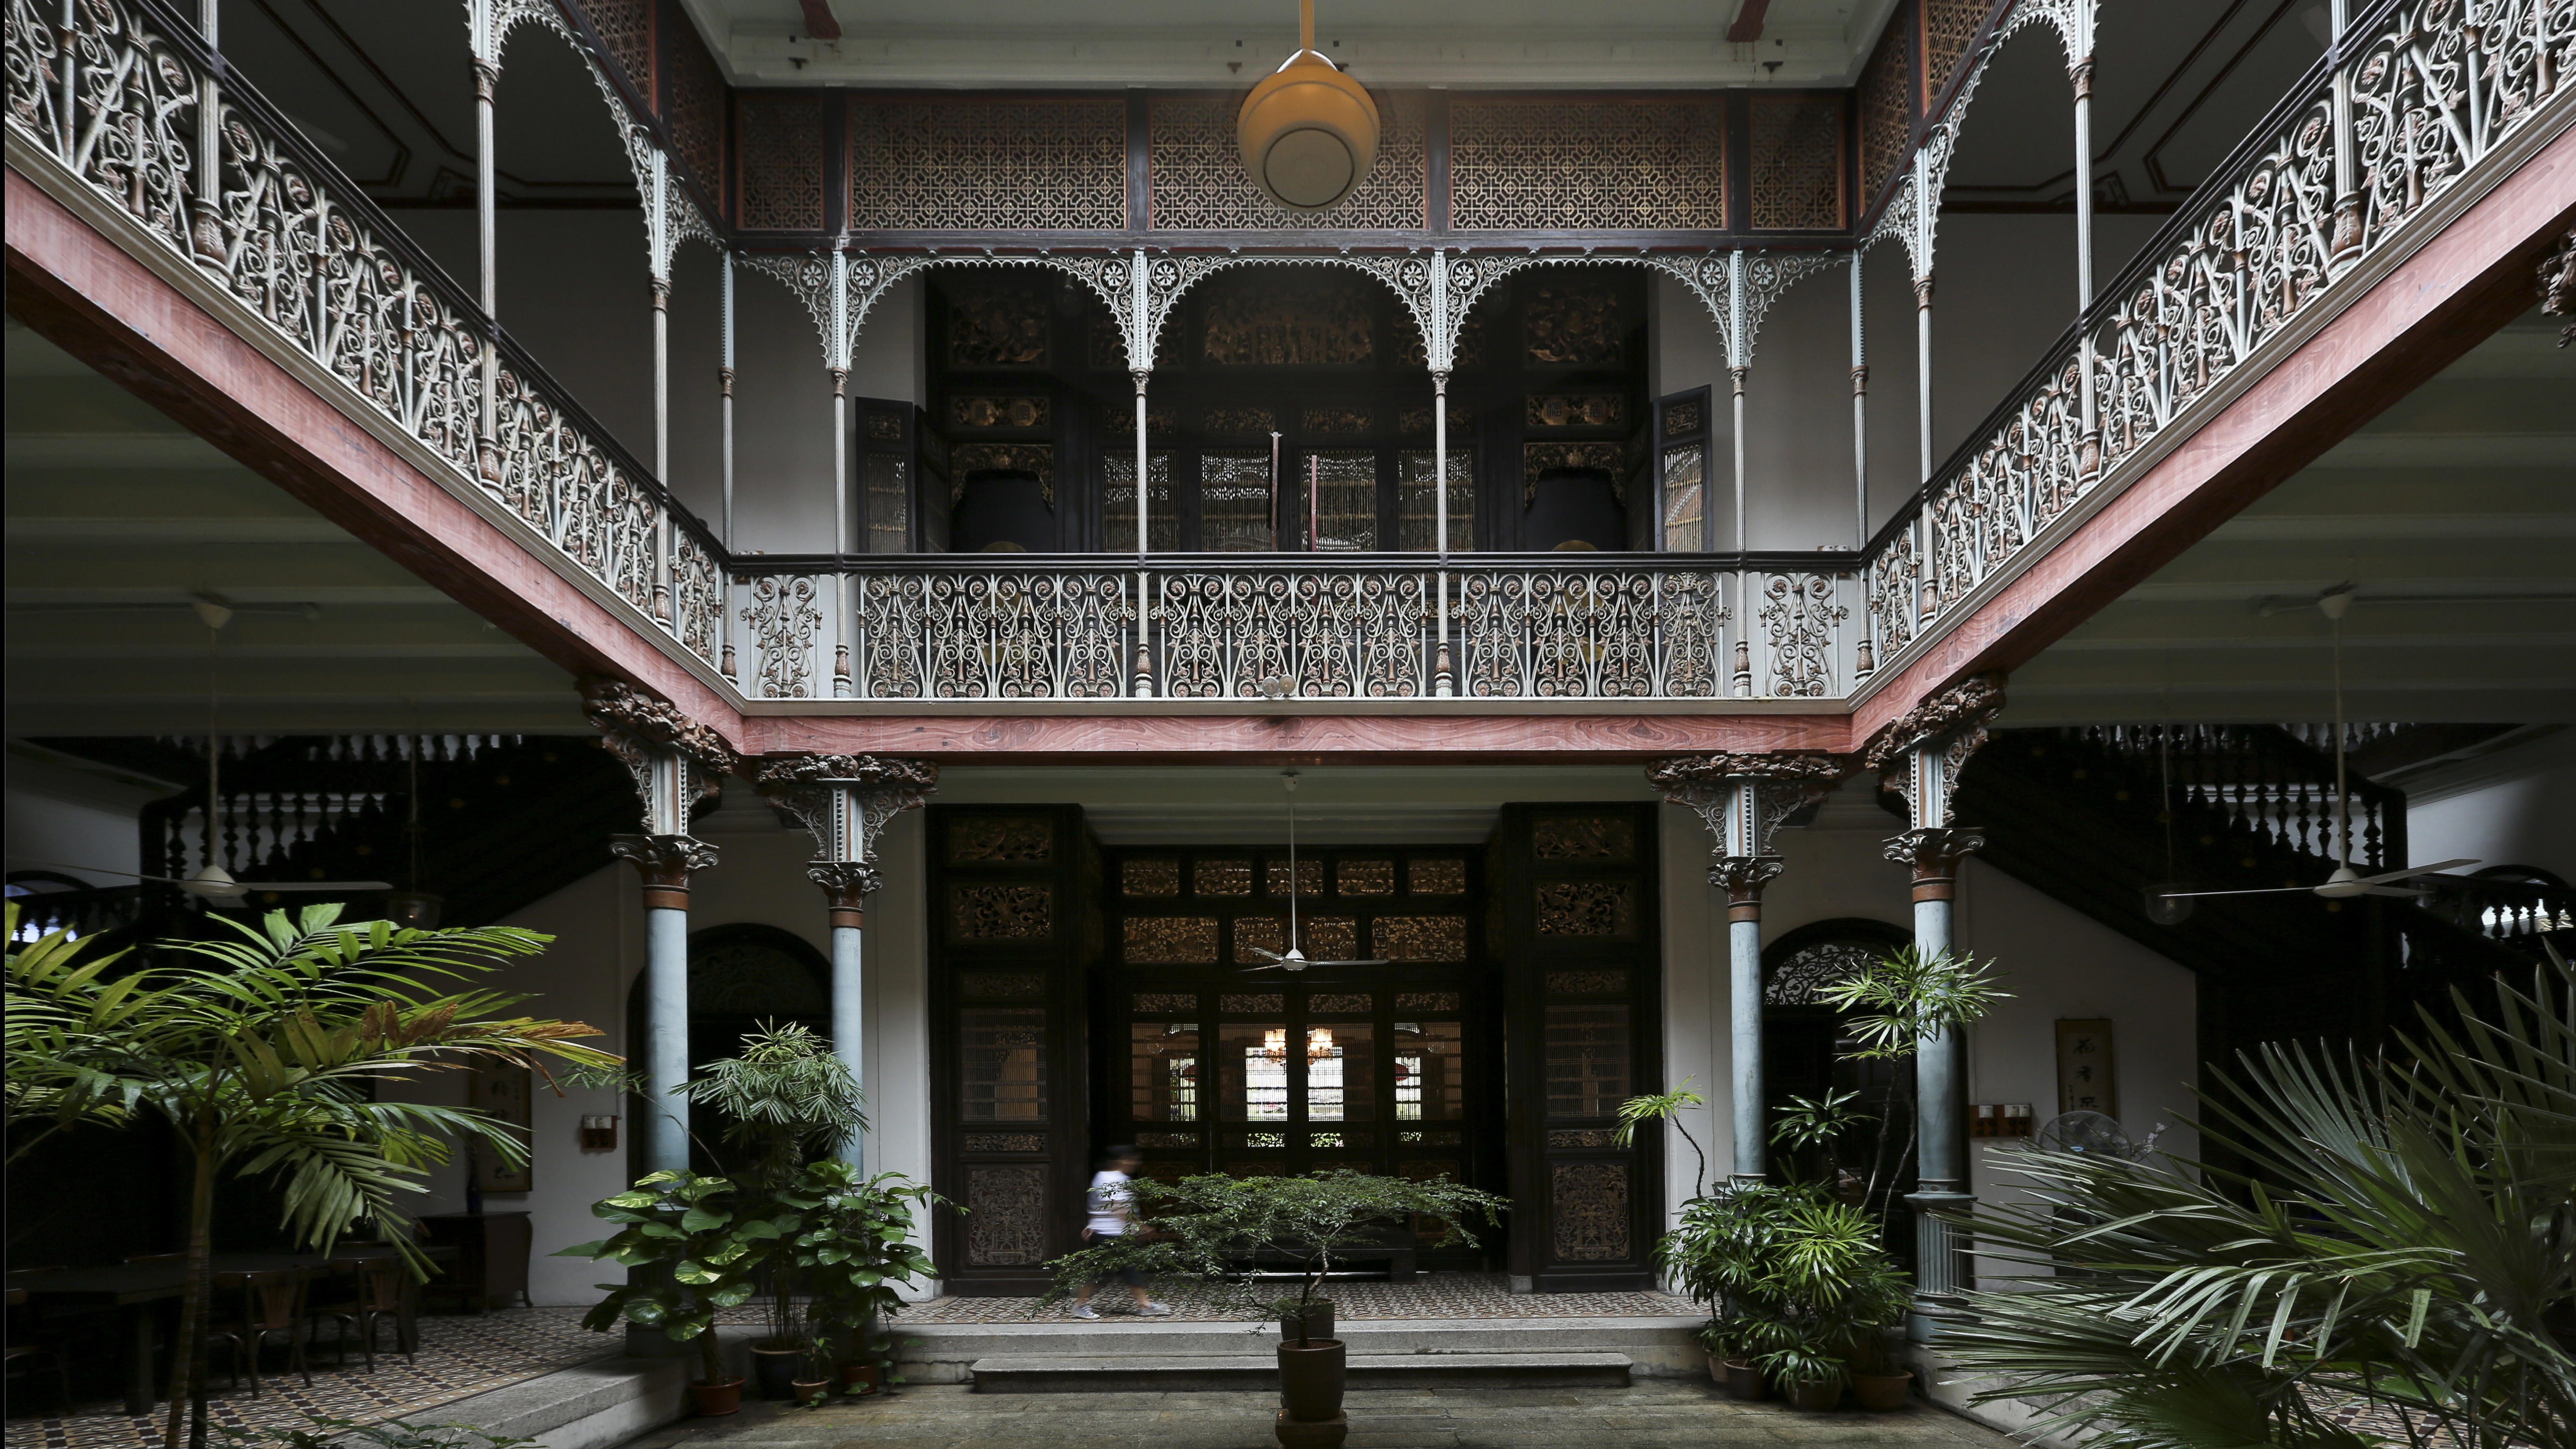 Its rescue from demolition and restoration also helped put the spotlight on Penang’s rich heritage, and the movement to unearth and restore pieces of the architectural history continues. Fun fact: You may recognise the Cheong Fatt Tze courtyard as the location for the pivotal mahjong scene in hit movie Crazy Rich Asians. Photo from Cheong Fatt Tze Mansion Blue Mansion